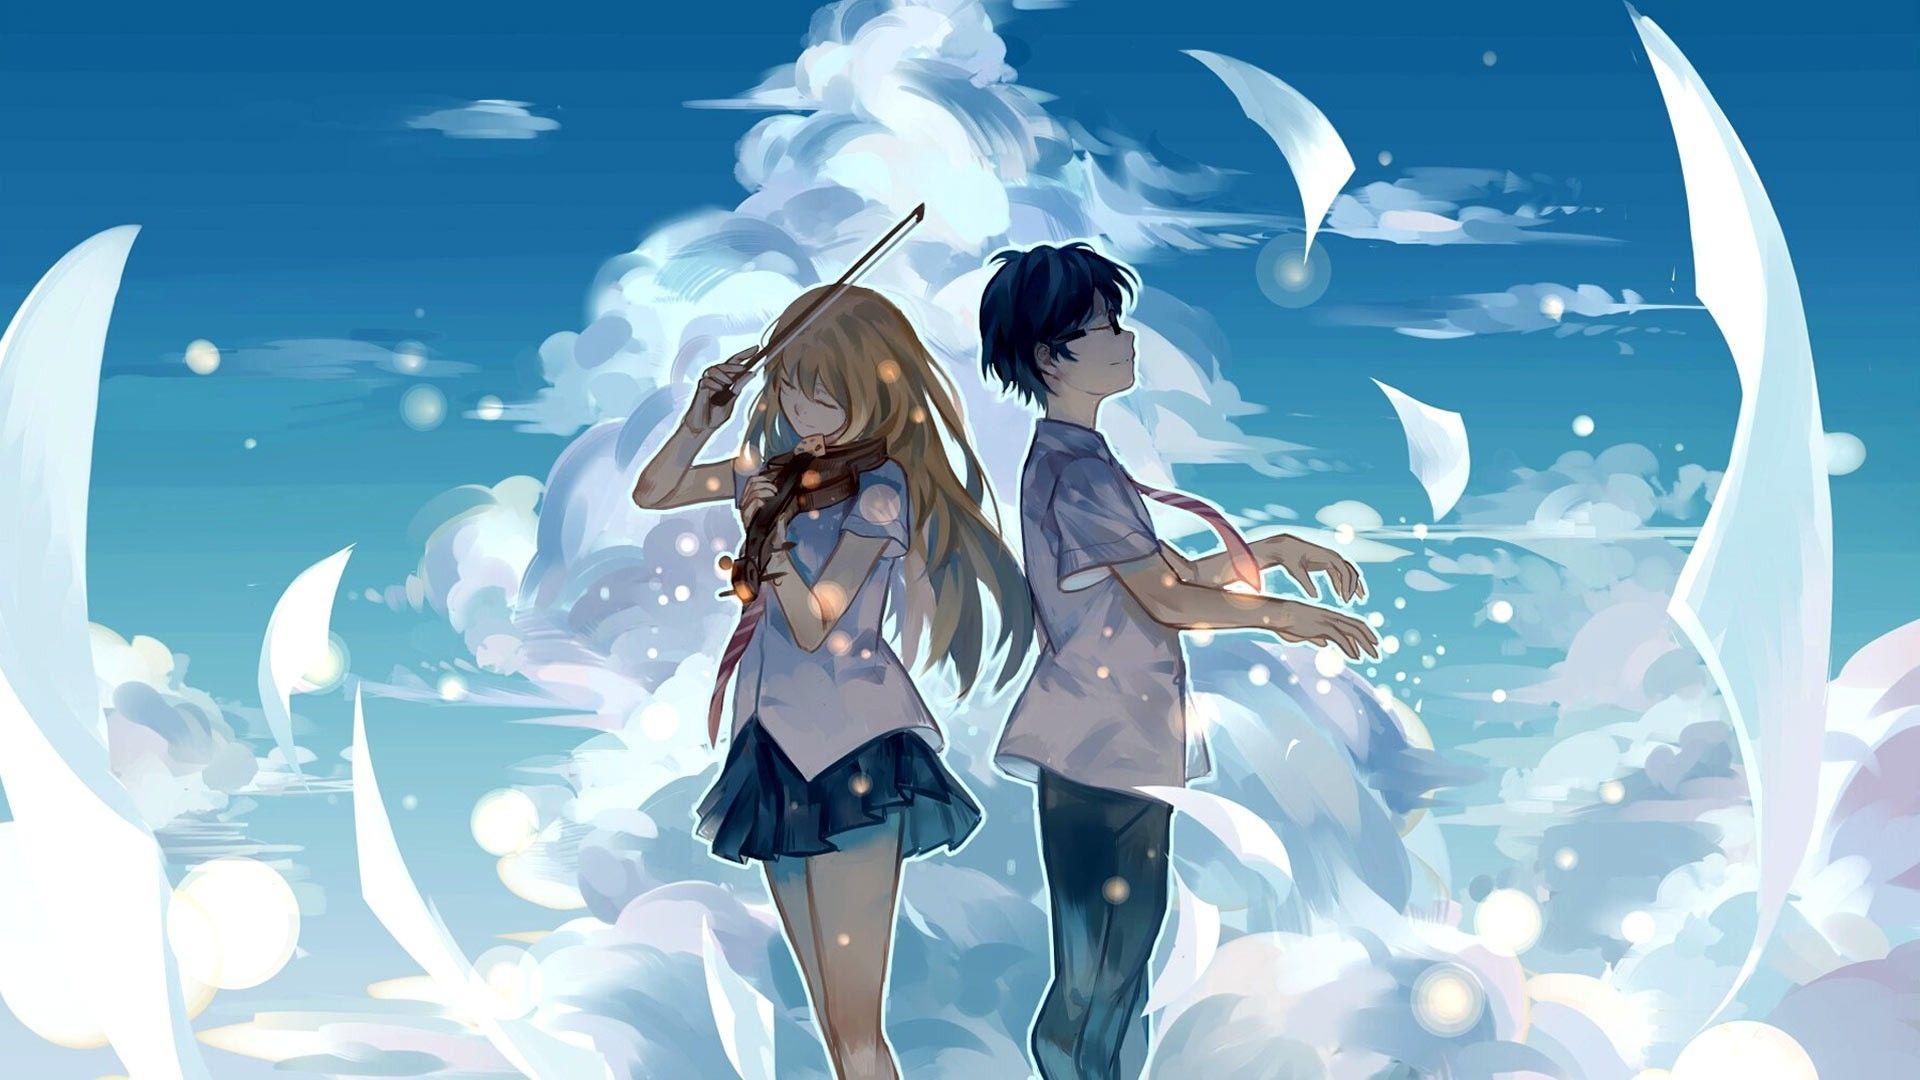 Beautiful Lovers Anime Wallpapers - Wallpaper Cave